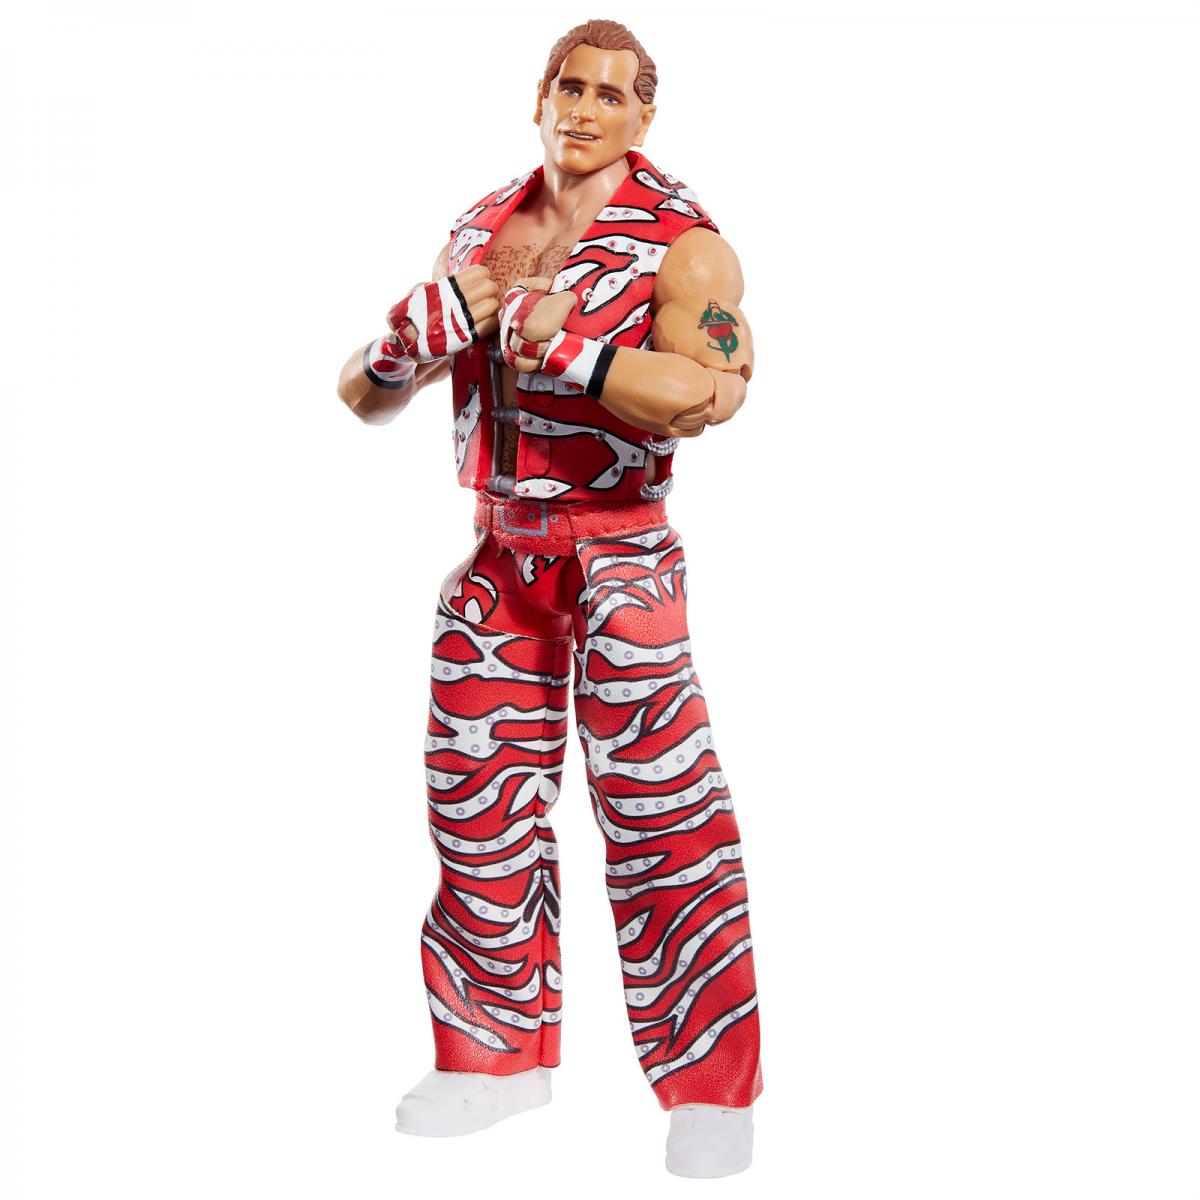 2022 WWE Mattel Ultimate Edition Fan Takeover Shawn Michaels [Exclusive]